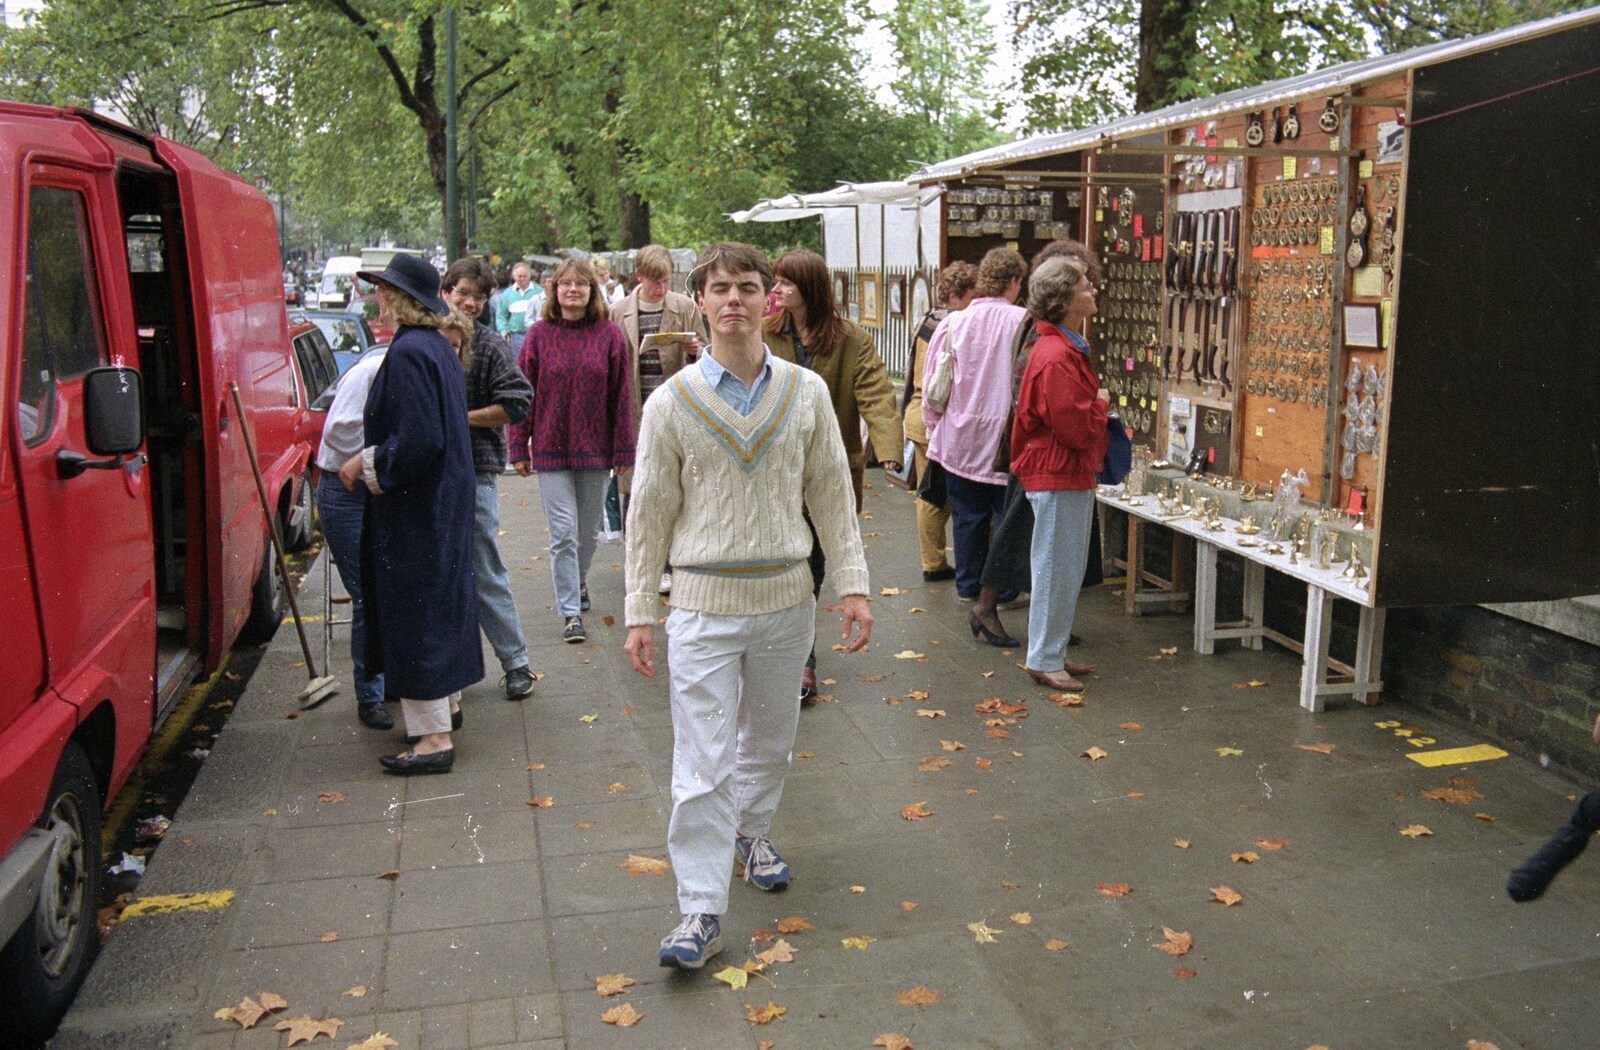 Bayswater Road Sunday street market from Nigel's Party and Hyde Park, Lancaster Gate, London - 16th October 1991